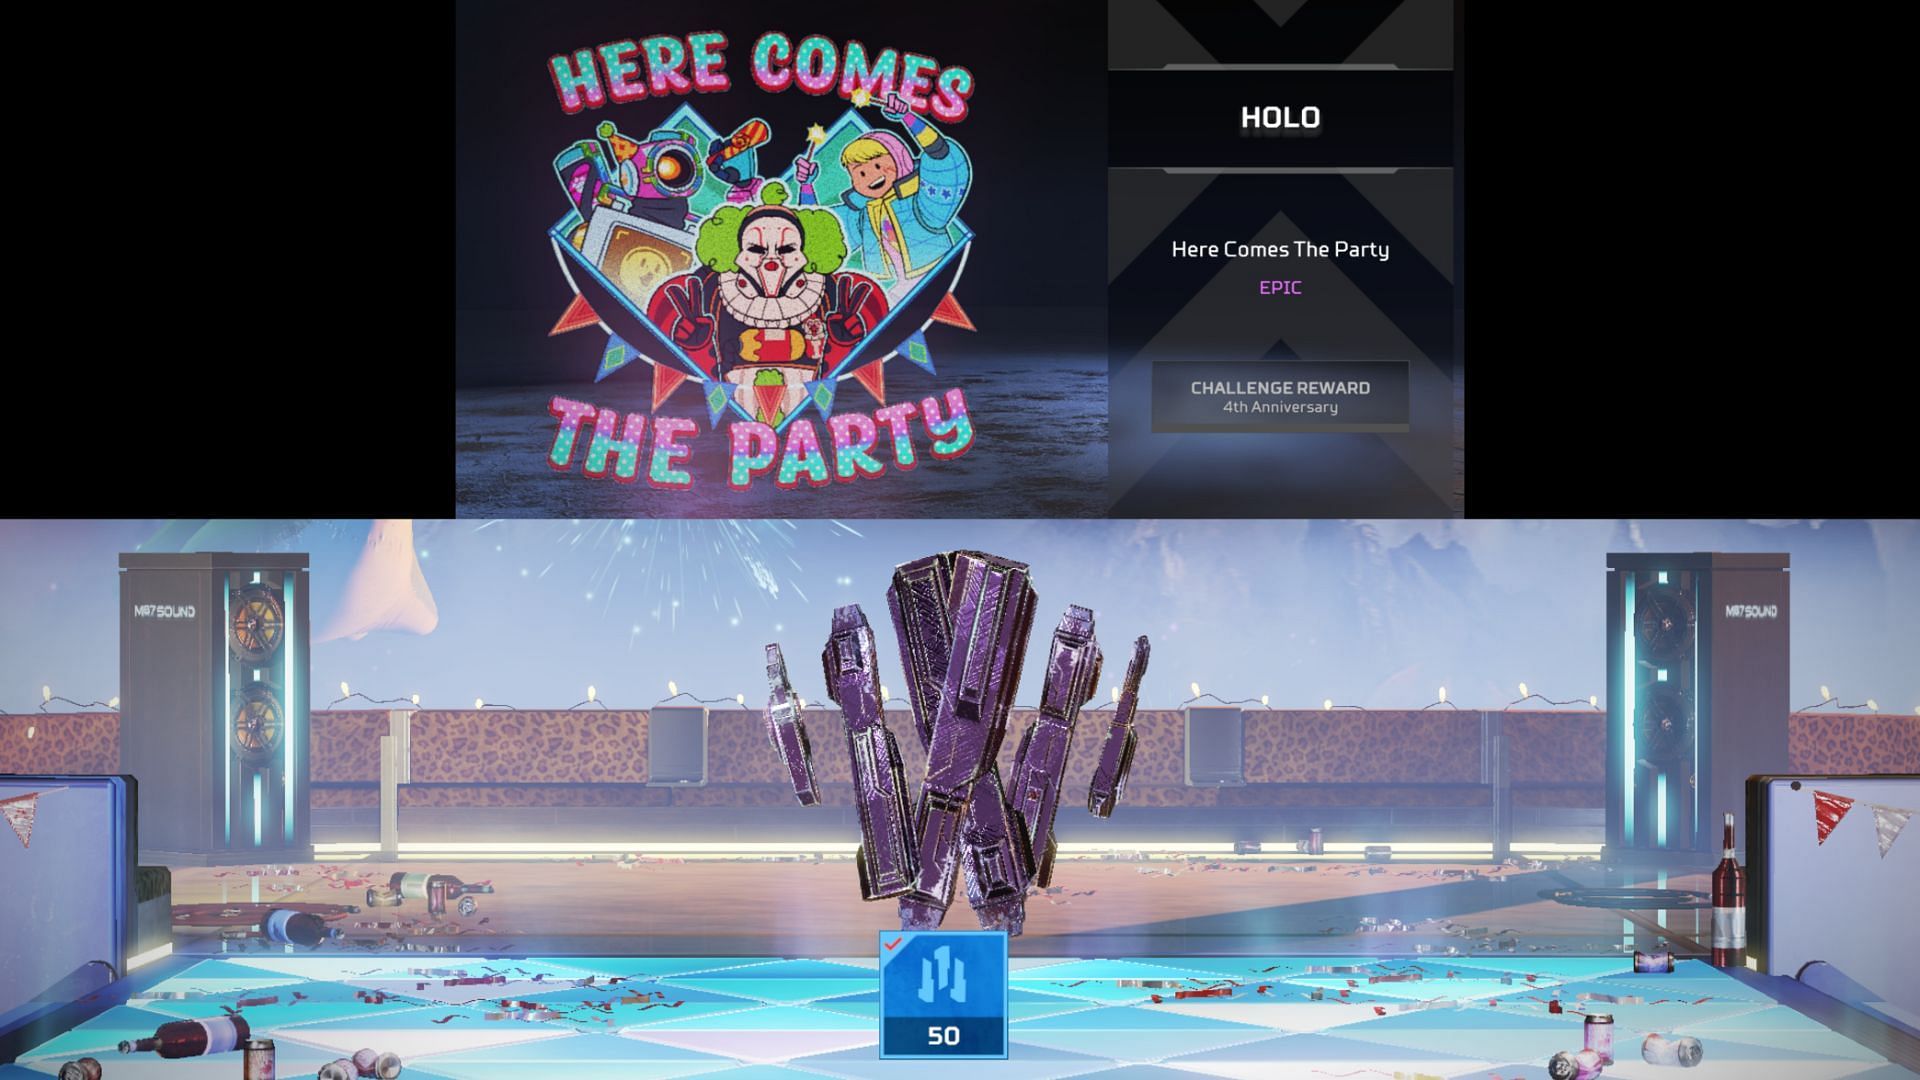 Here Comes The Party Holospray was inspired by Maytaki (Image via EA)